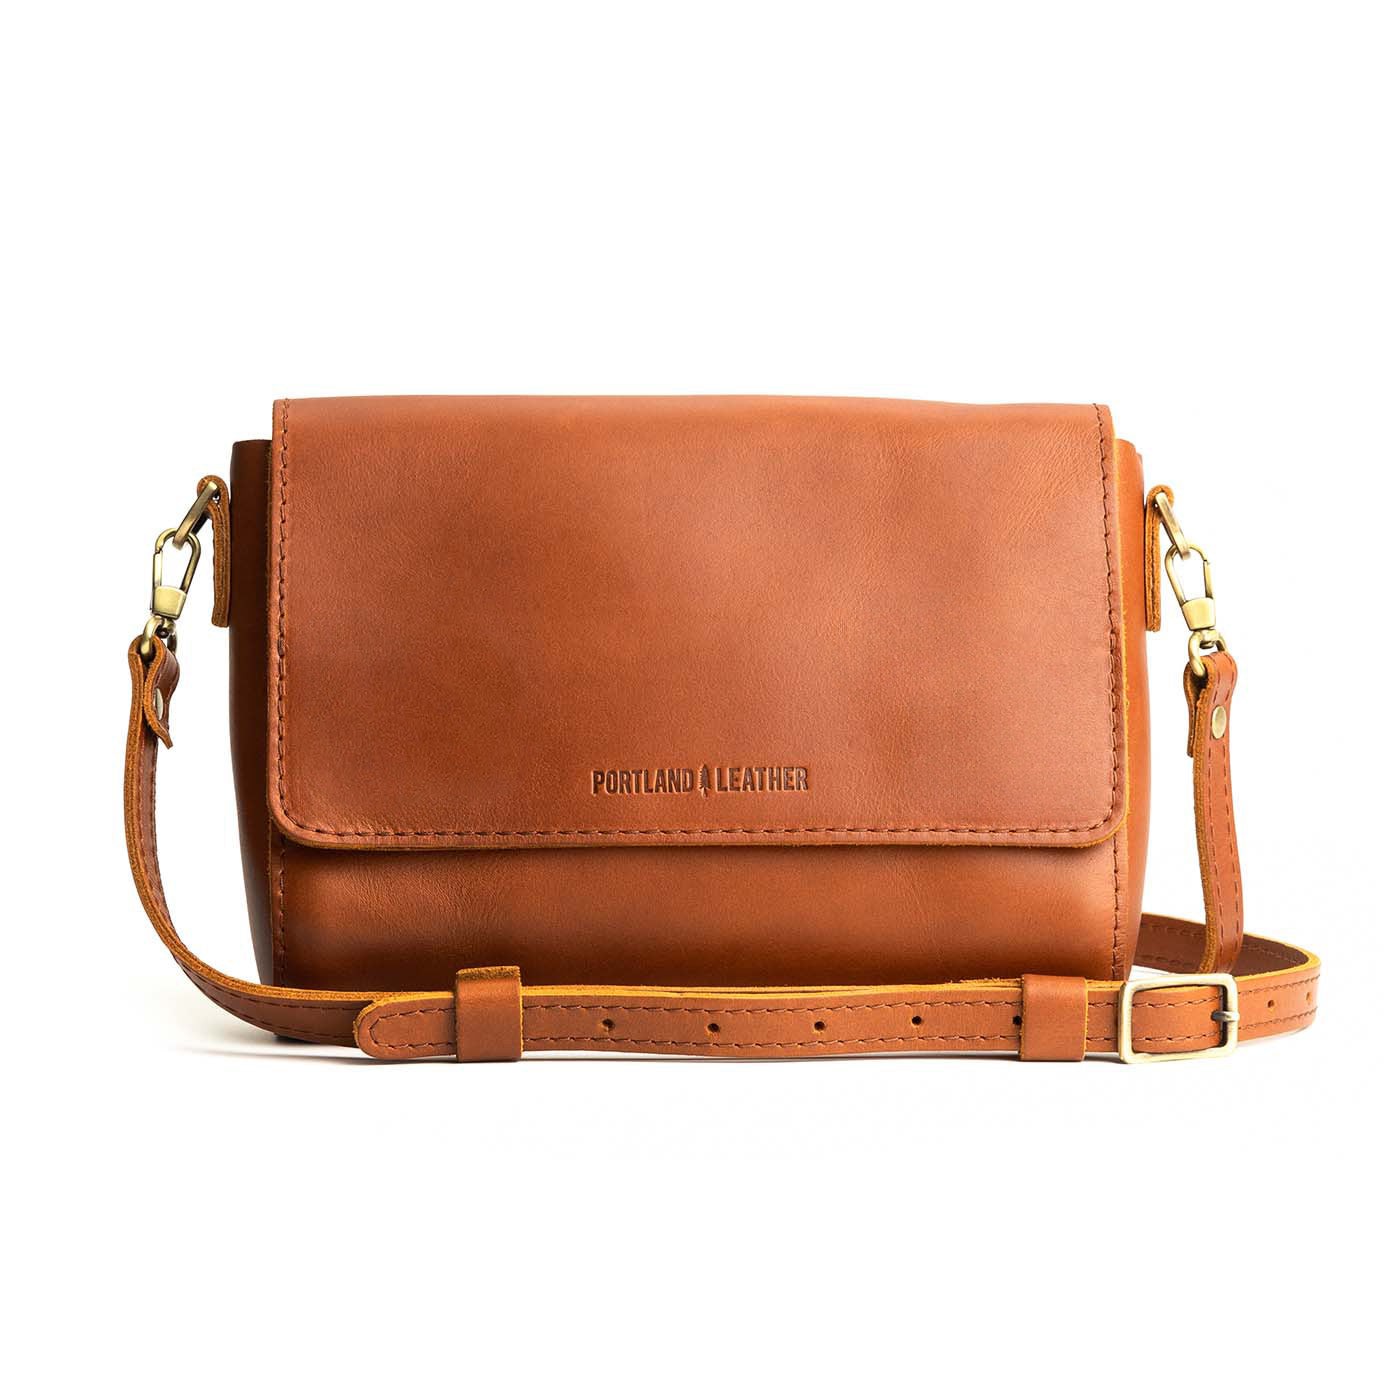 Made by Minga | Women's Woven Crossbody Bag with Adjustable Leather Strap | Orange | Plant-Dyed Natural Fiber